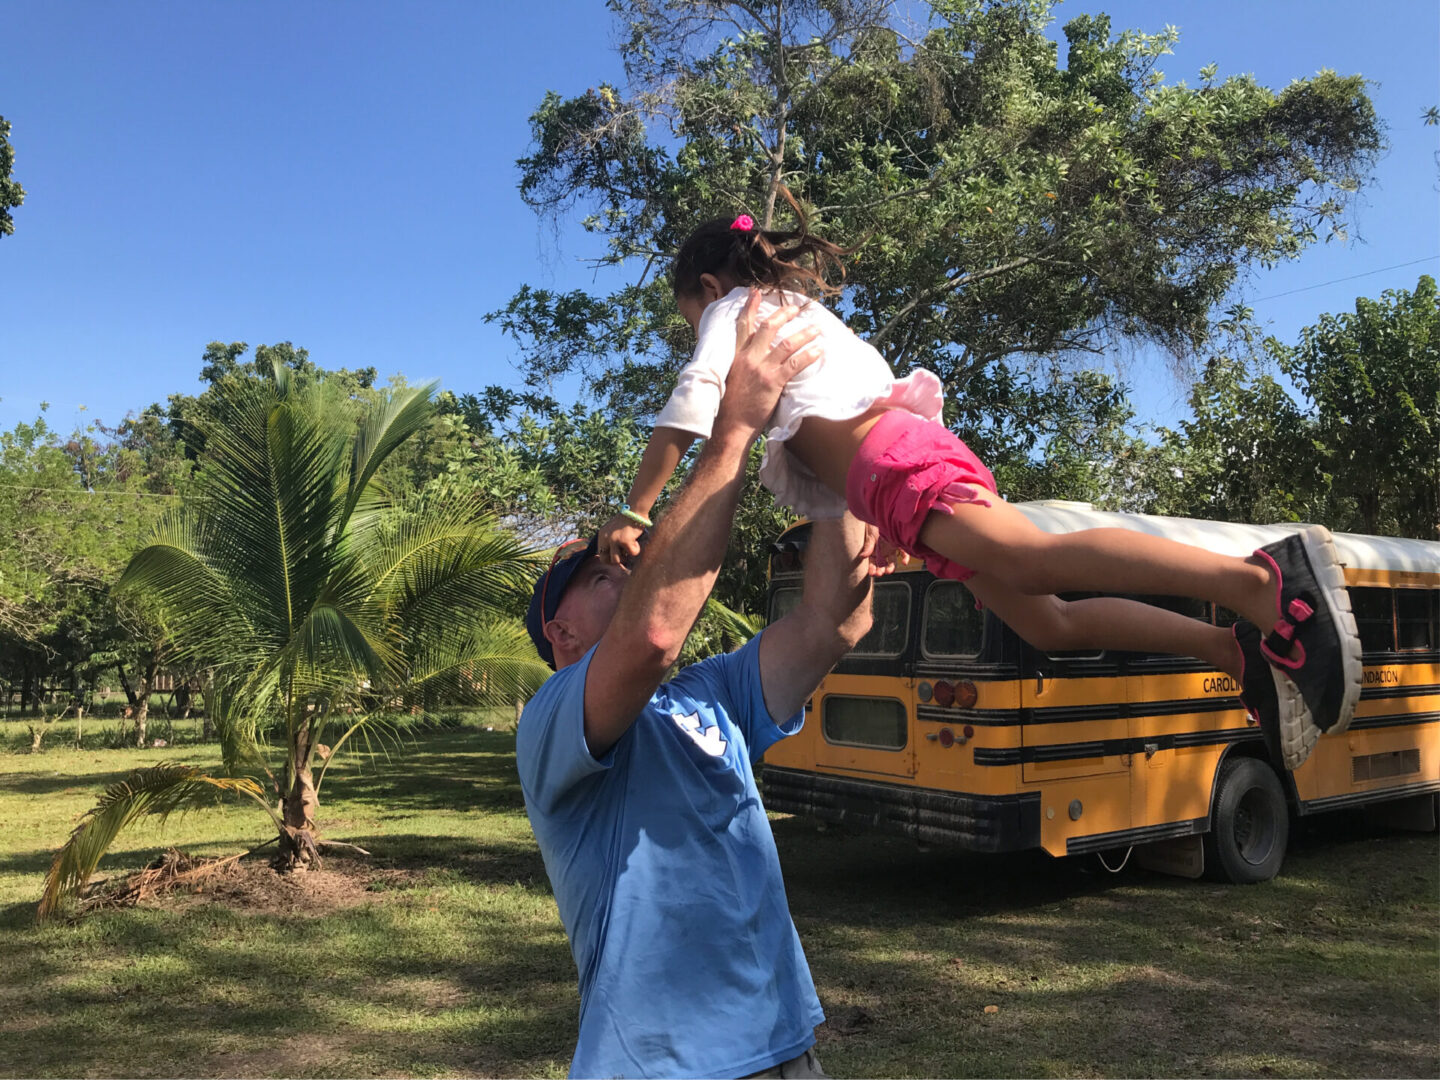 A man throwing a little girl up to the sky